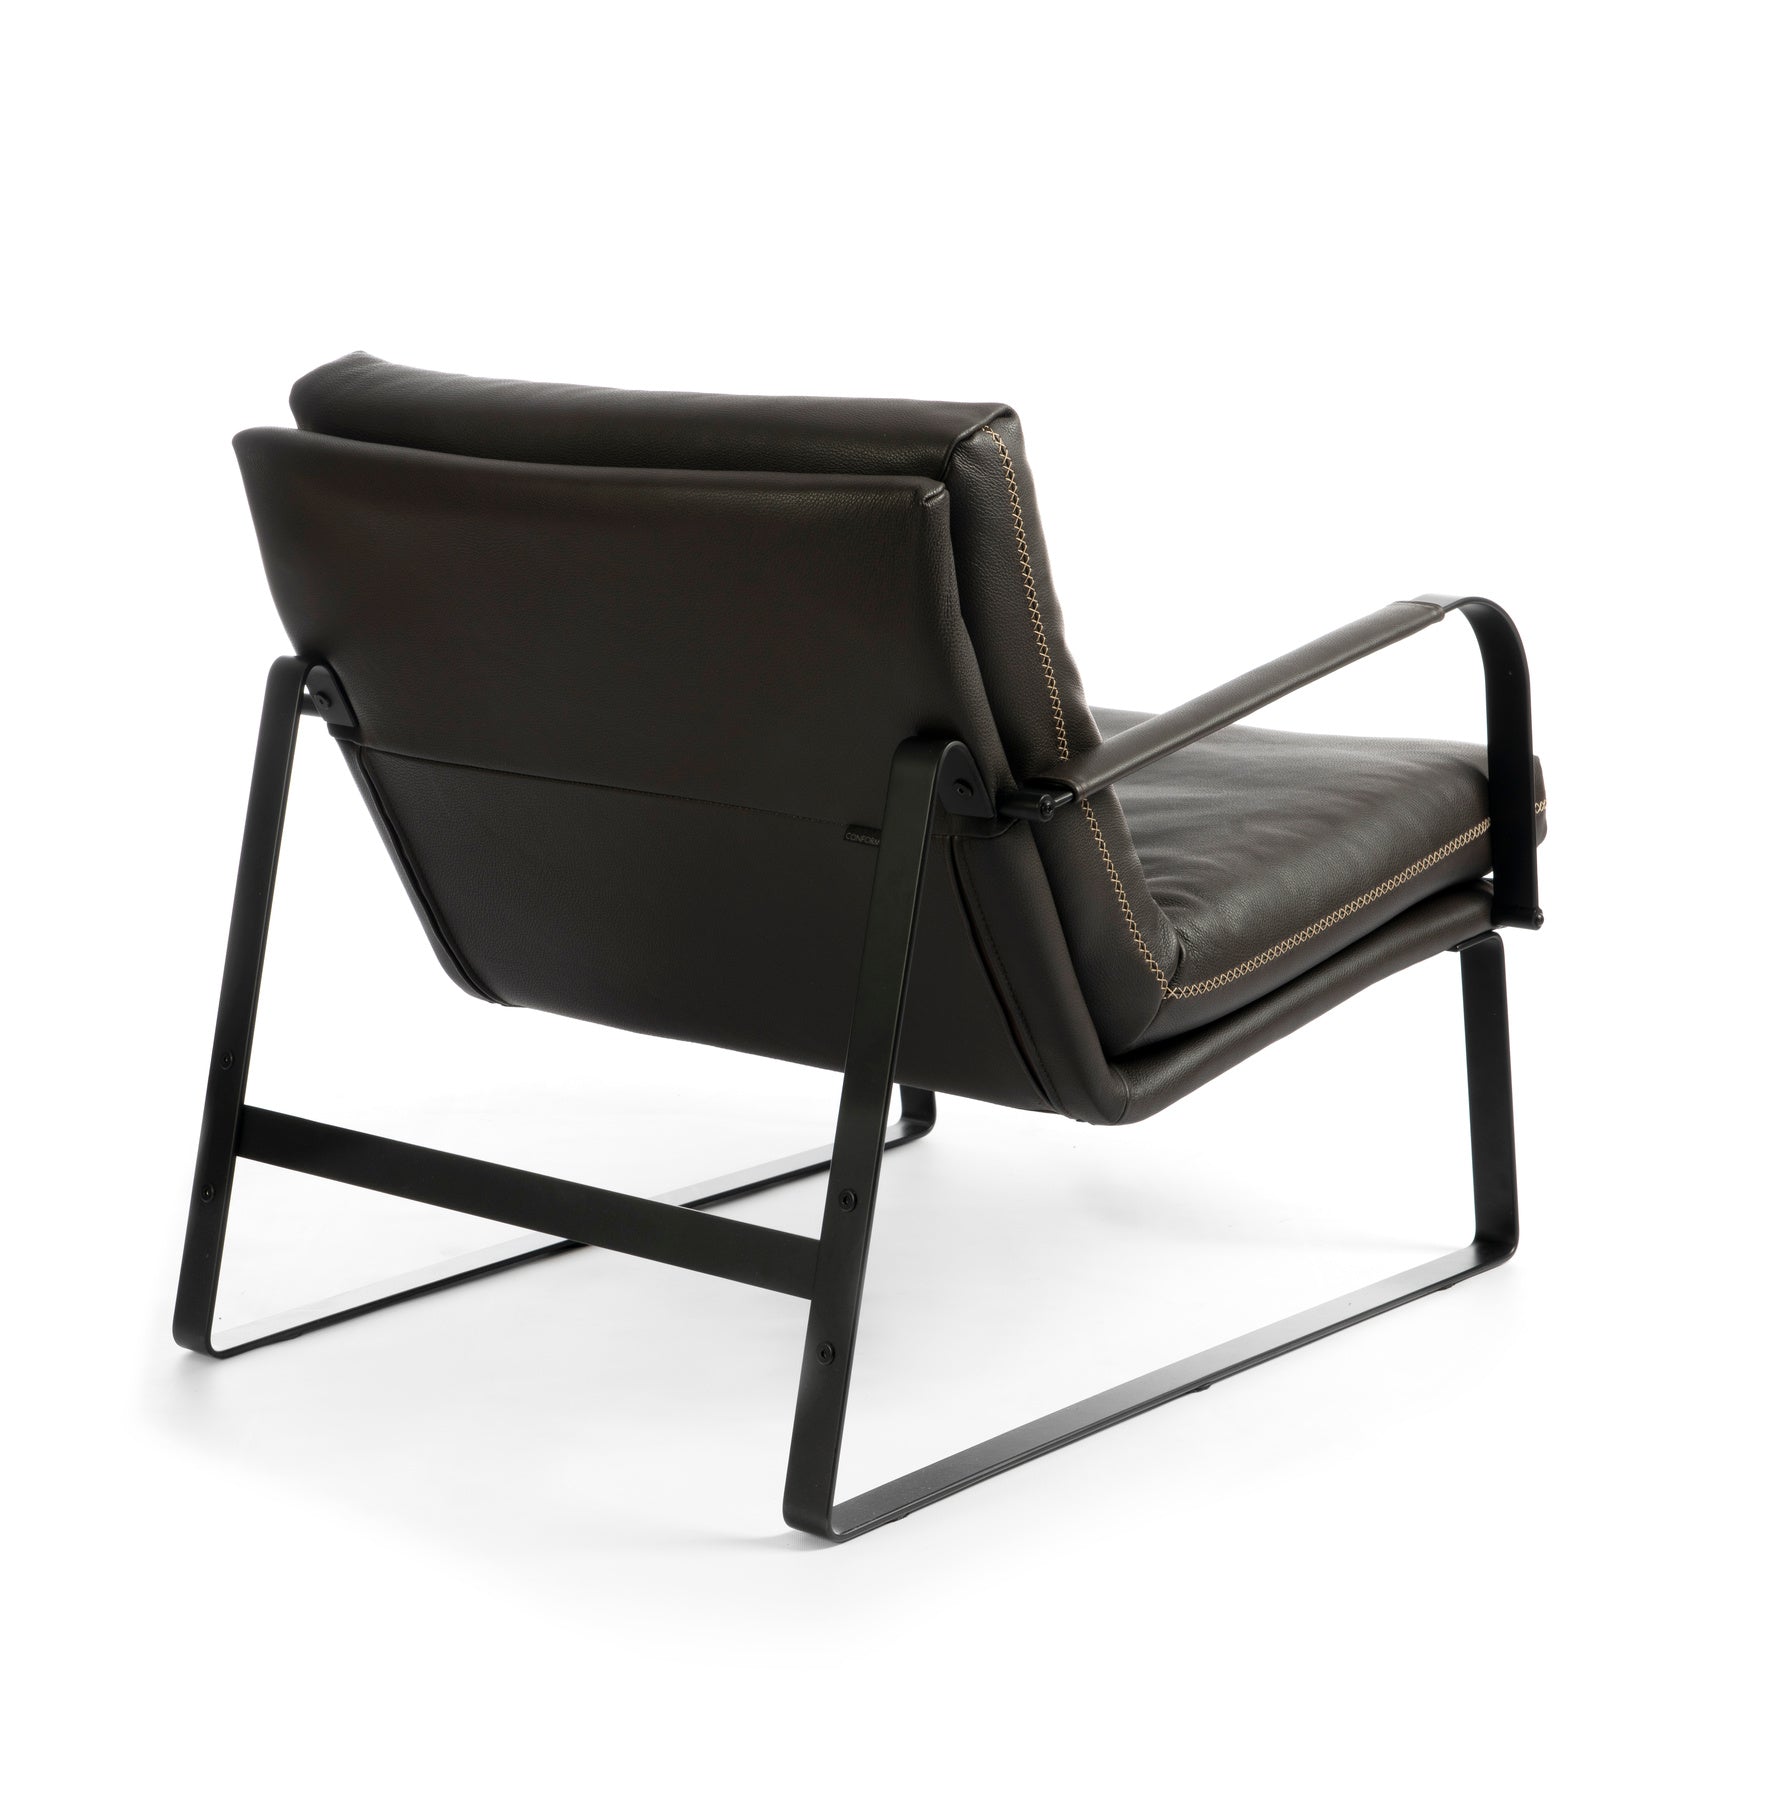 SHABBY LOUNGE CHAIR by CONFORM